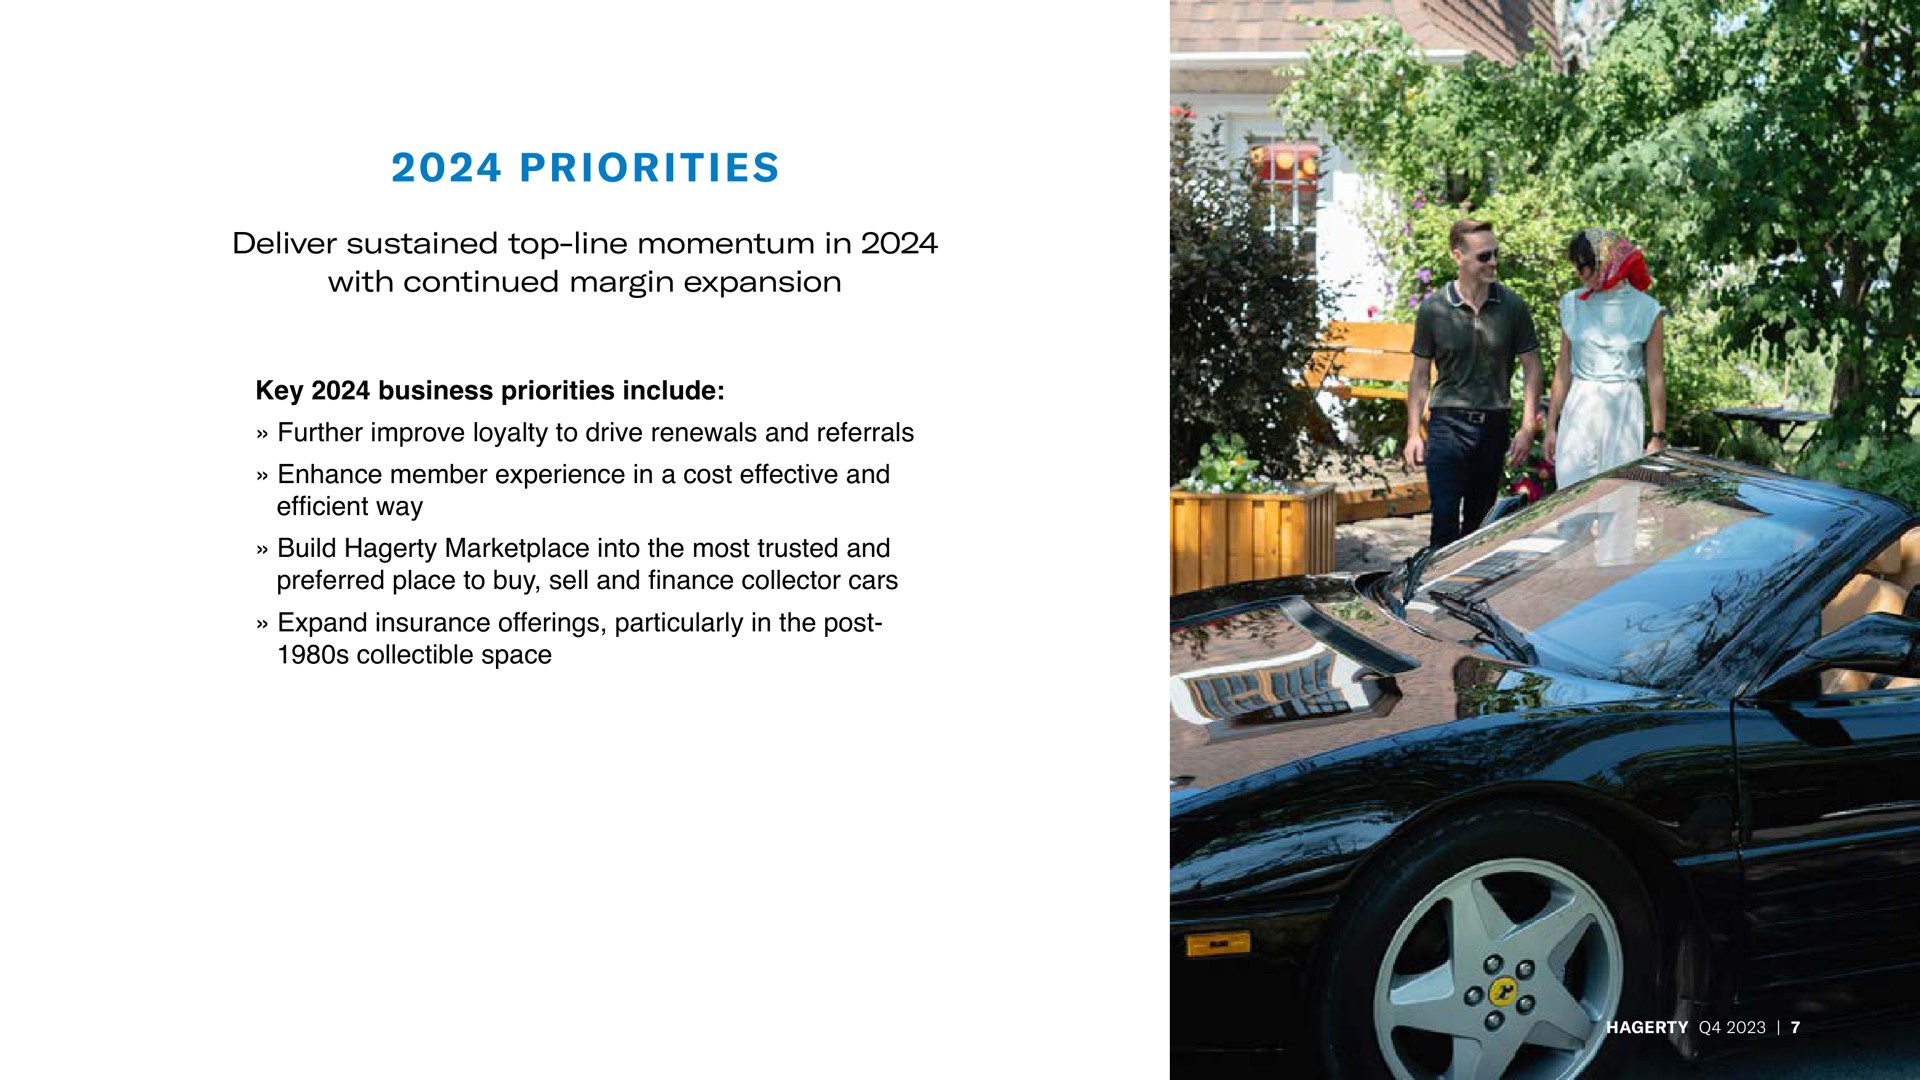 key business priorities include further improve loyalty to drive renewals and referrals enhance member experience in a cost effective and efficient way build into the most trusted and preferred place to buy sell and finance collector cars expand insurance offerings particularly in the post collectible space | Hagerty